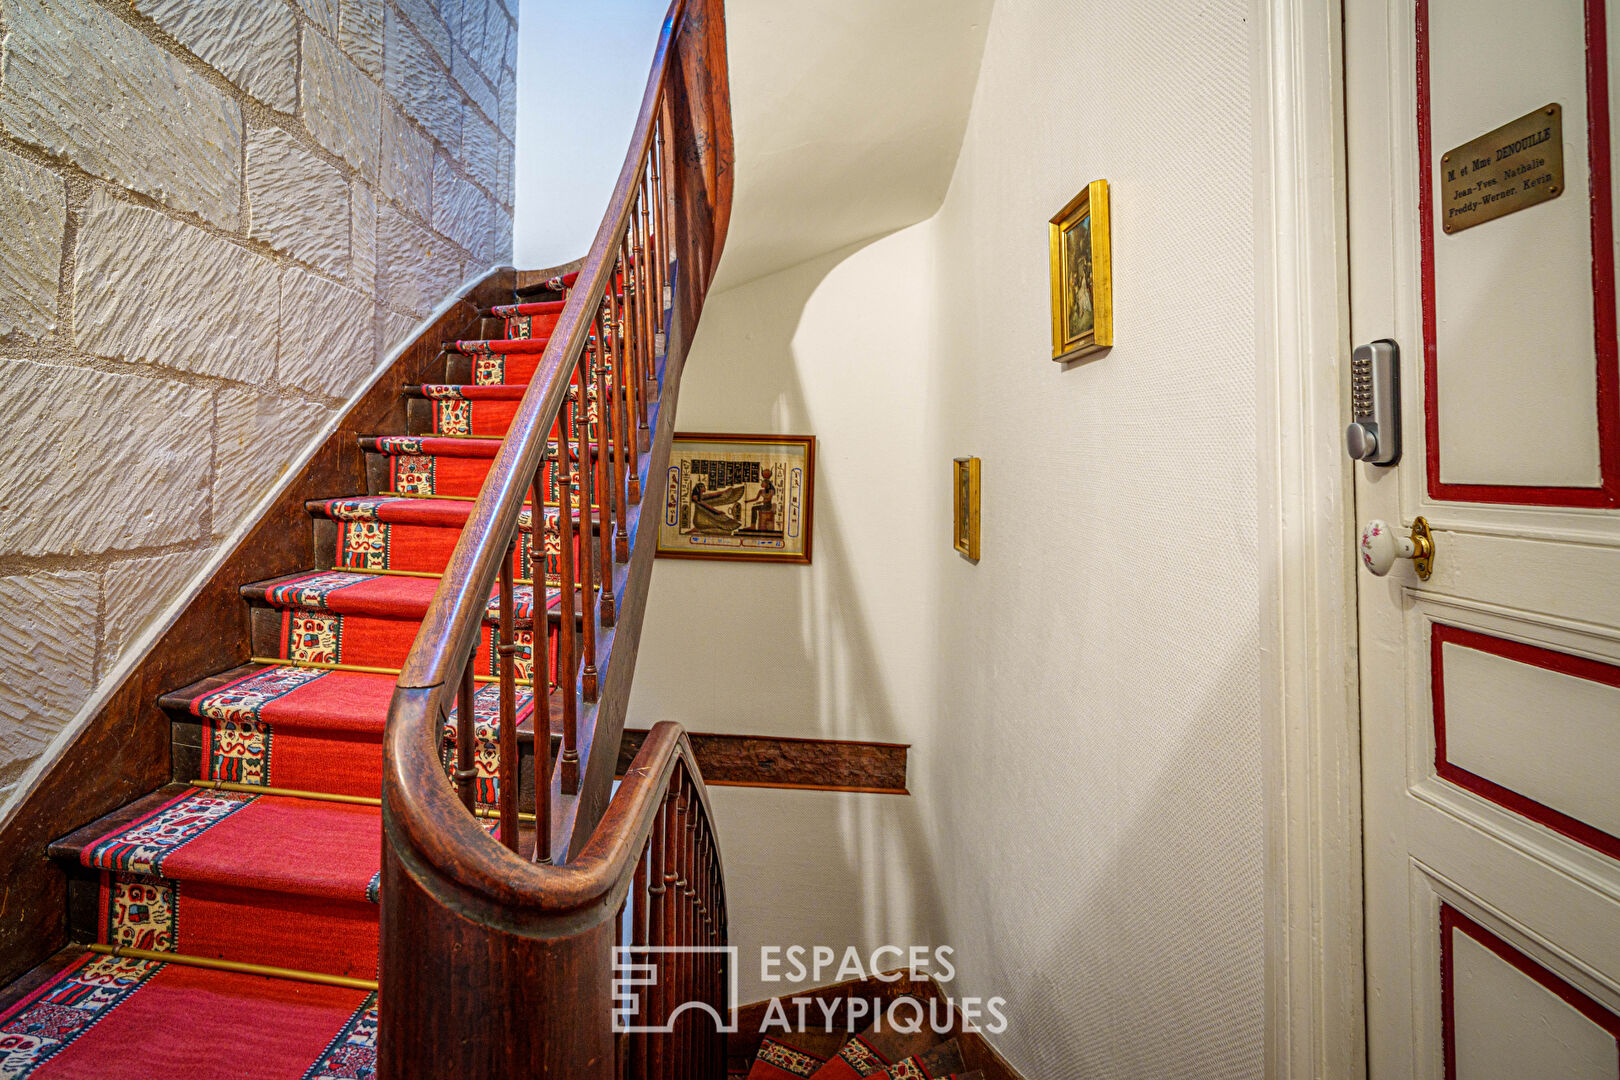 Private mansion: volumes and authenticity in the city center